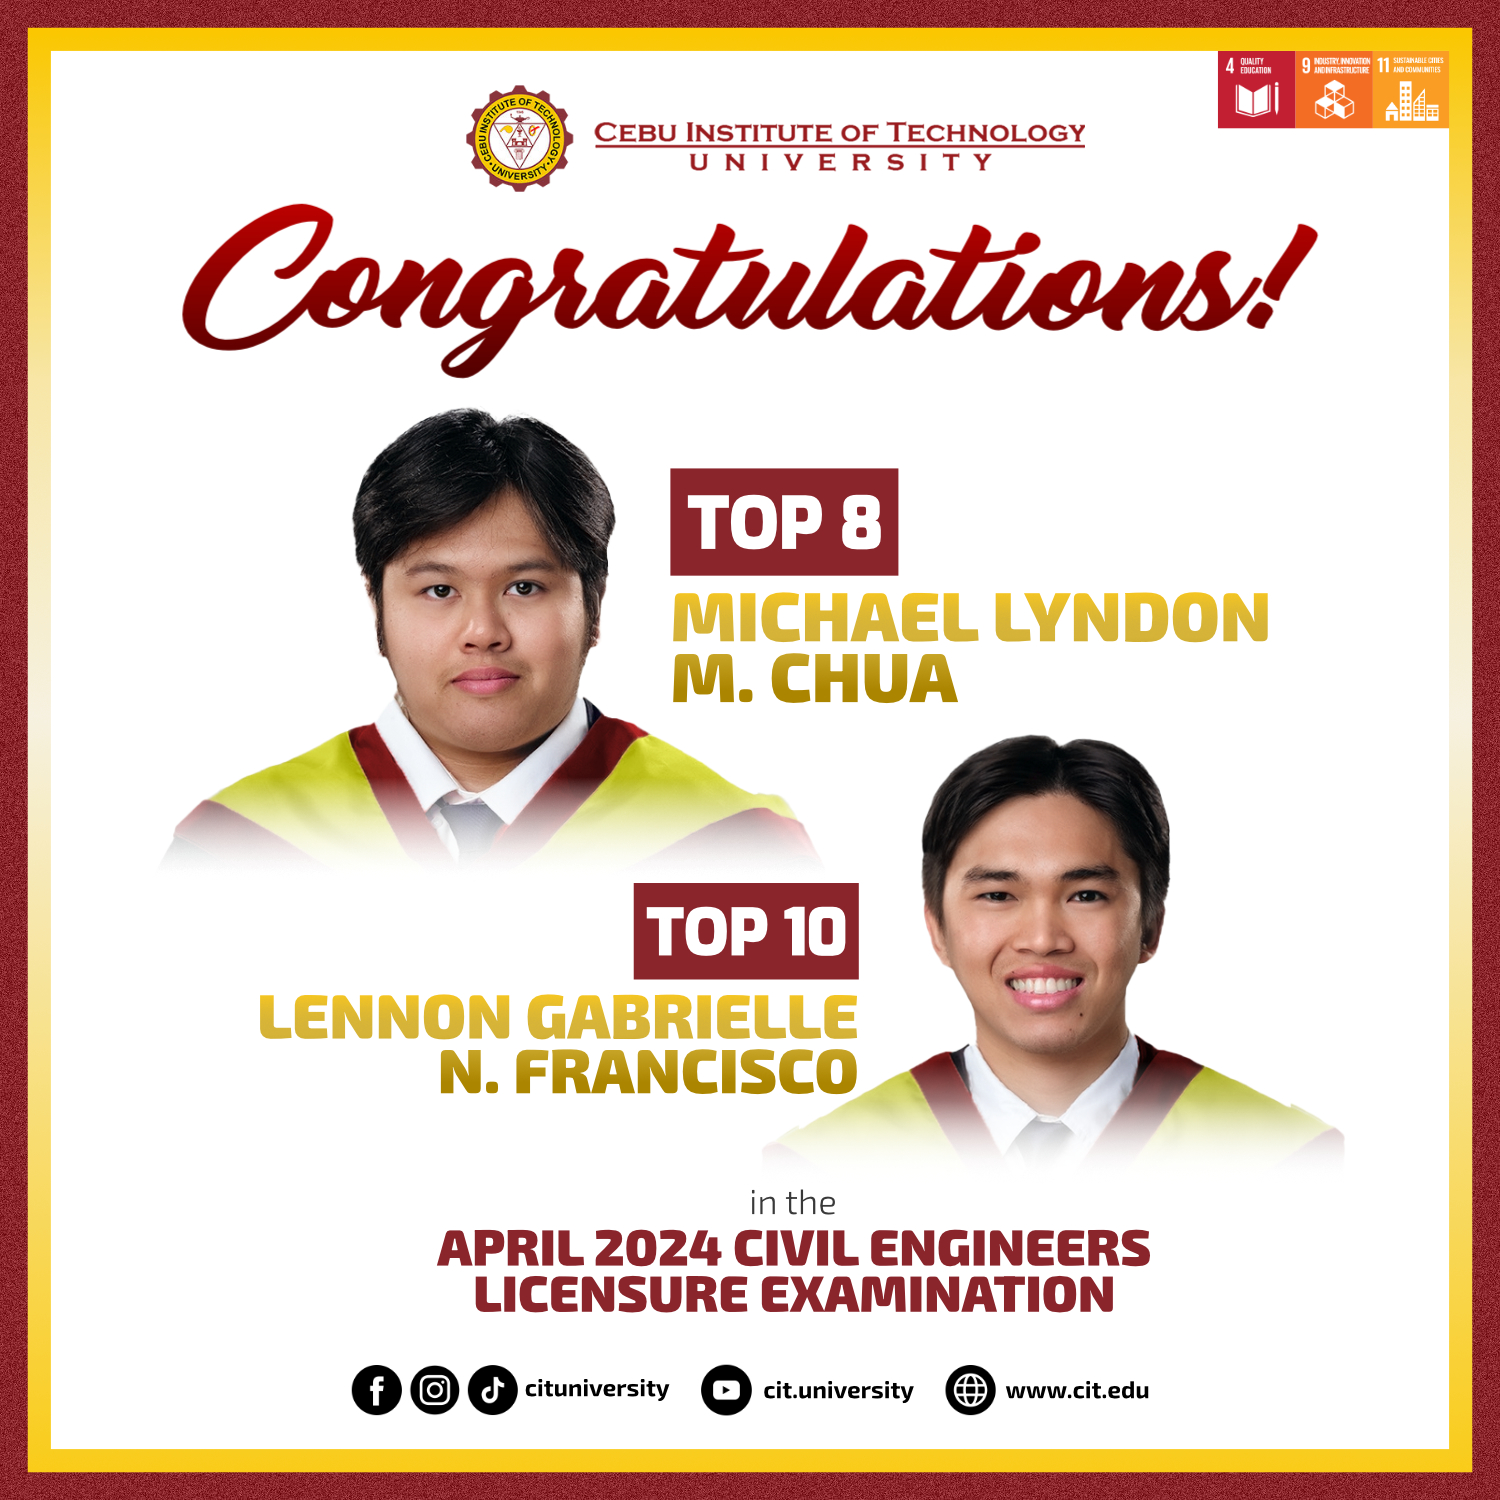 Not Just One, But TWO TOPNOTCHERS in the April 2024 CE Licensure Exam